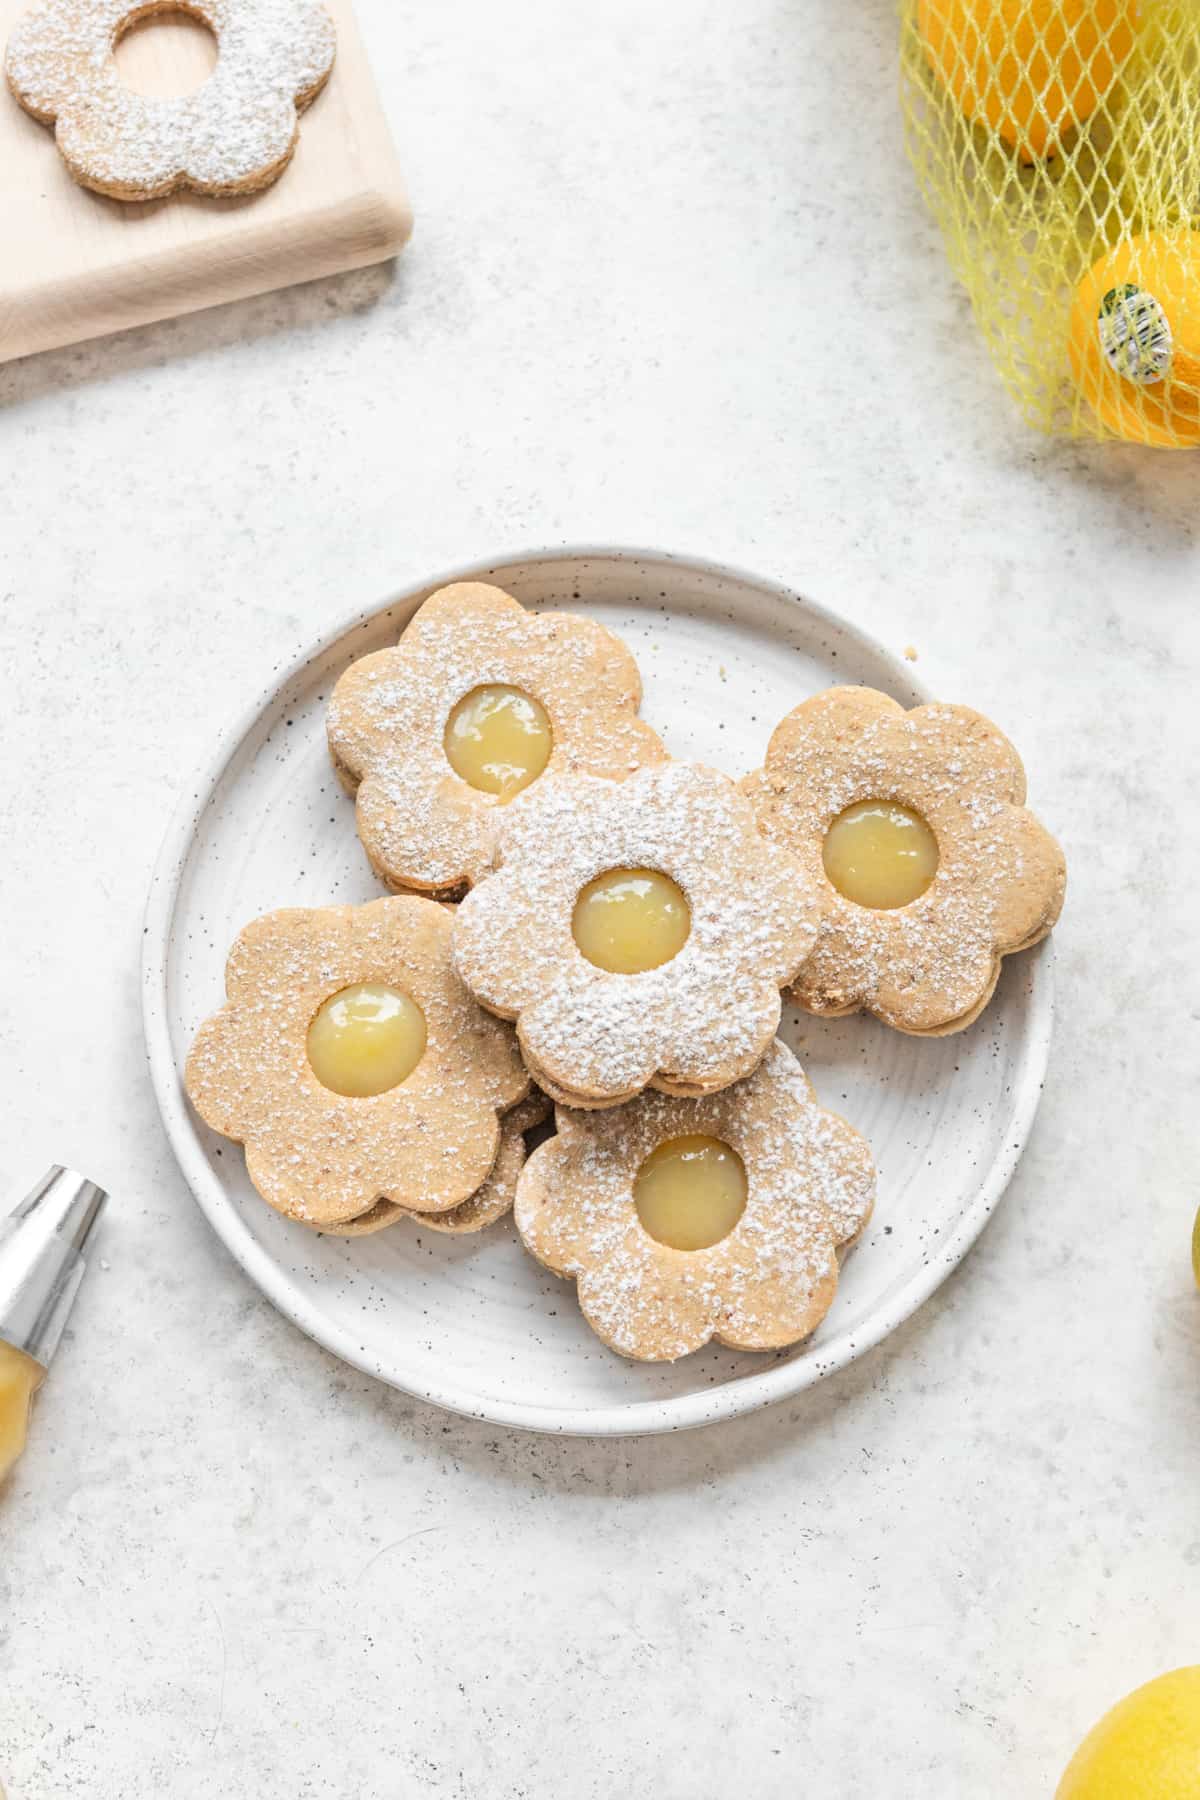 Flower shaped shortbread cookies on a white plate.